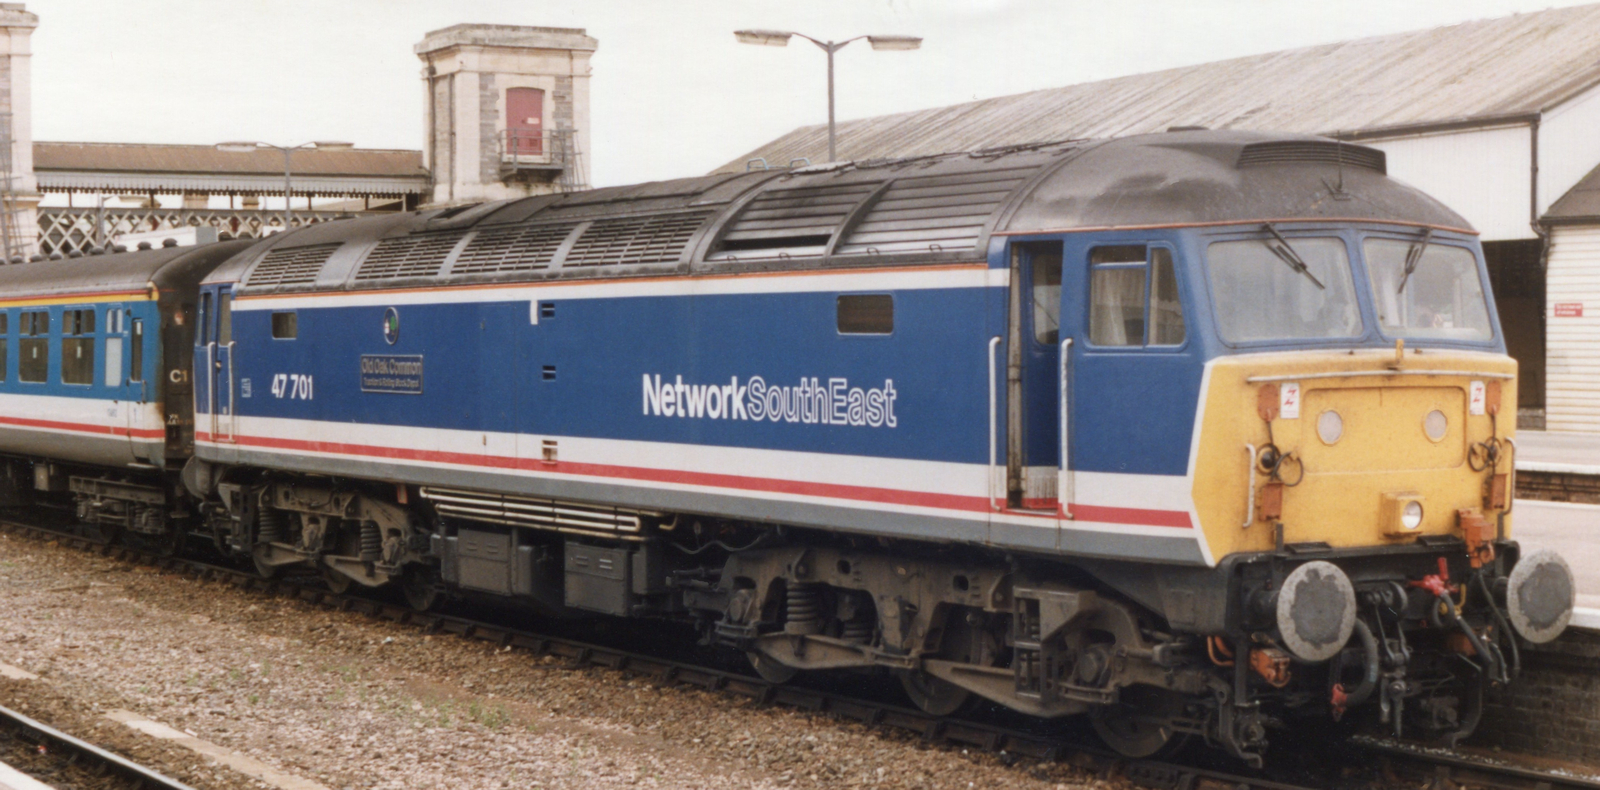 Network South East 47701 in Exeter